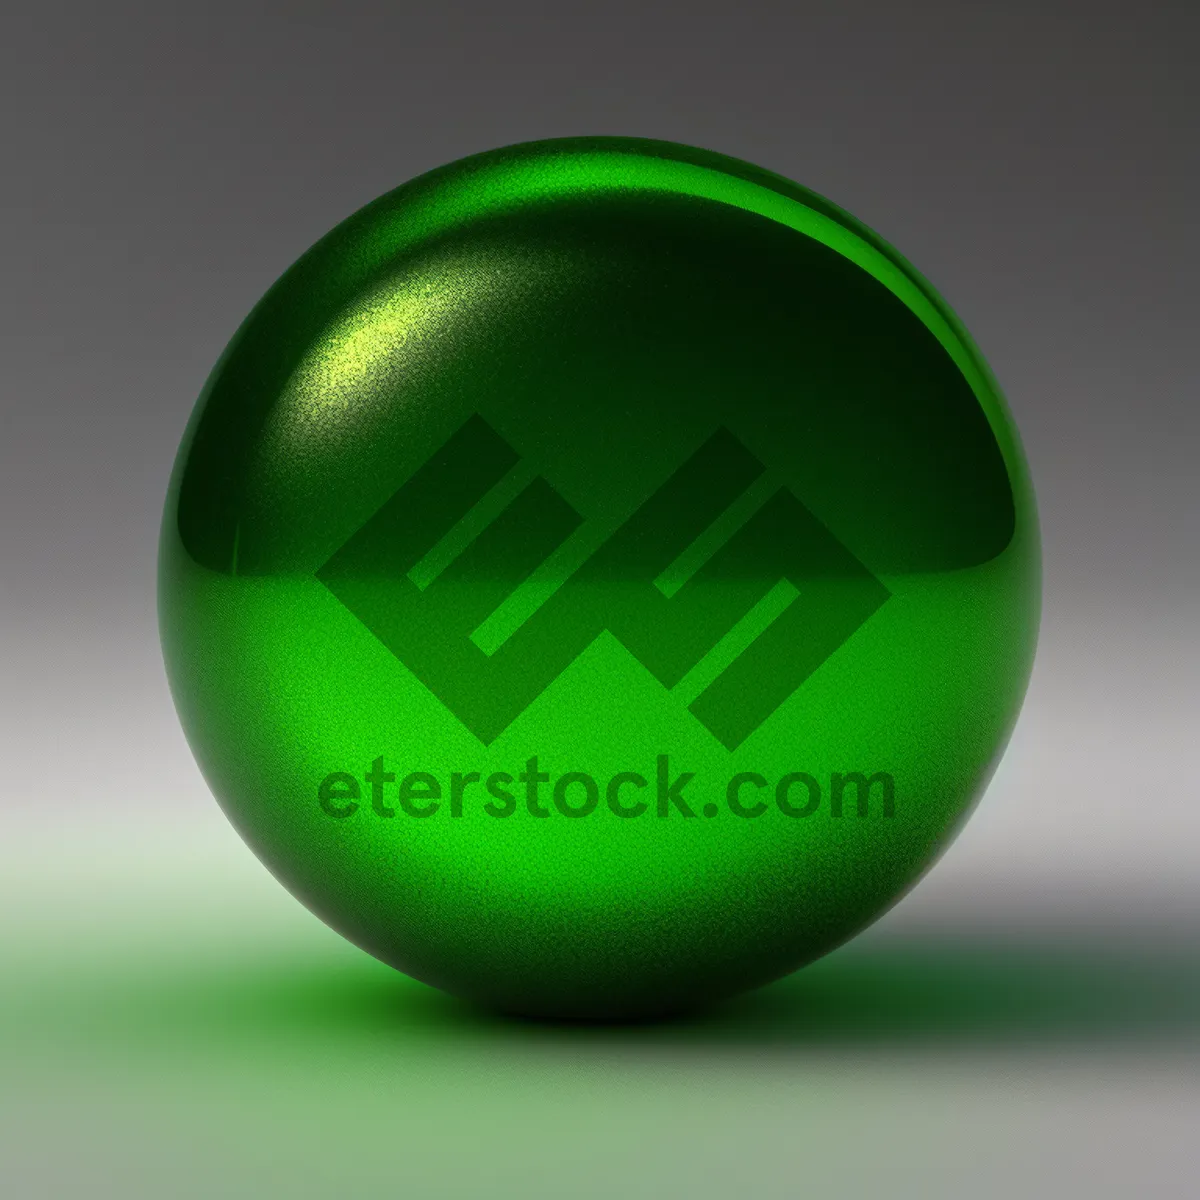 Picture of Shiny Glass Web Button Set with Reflection